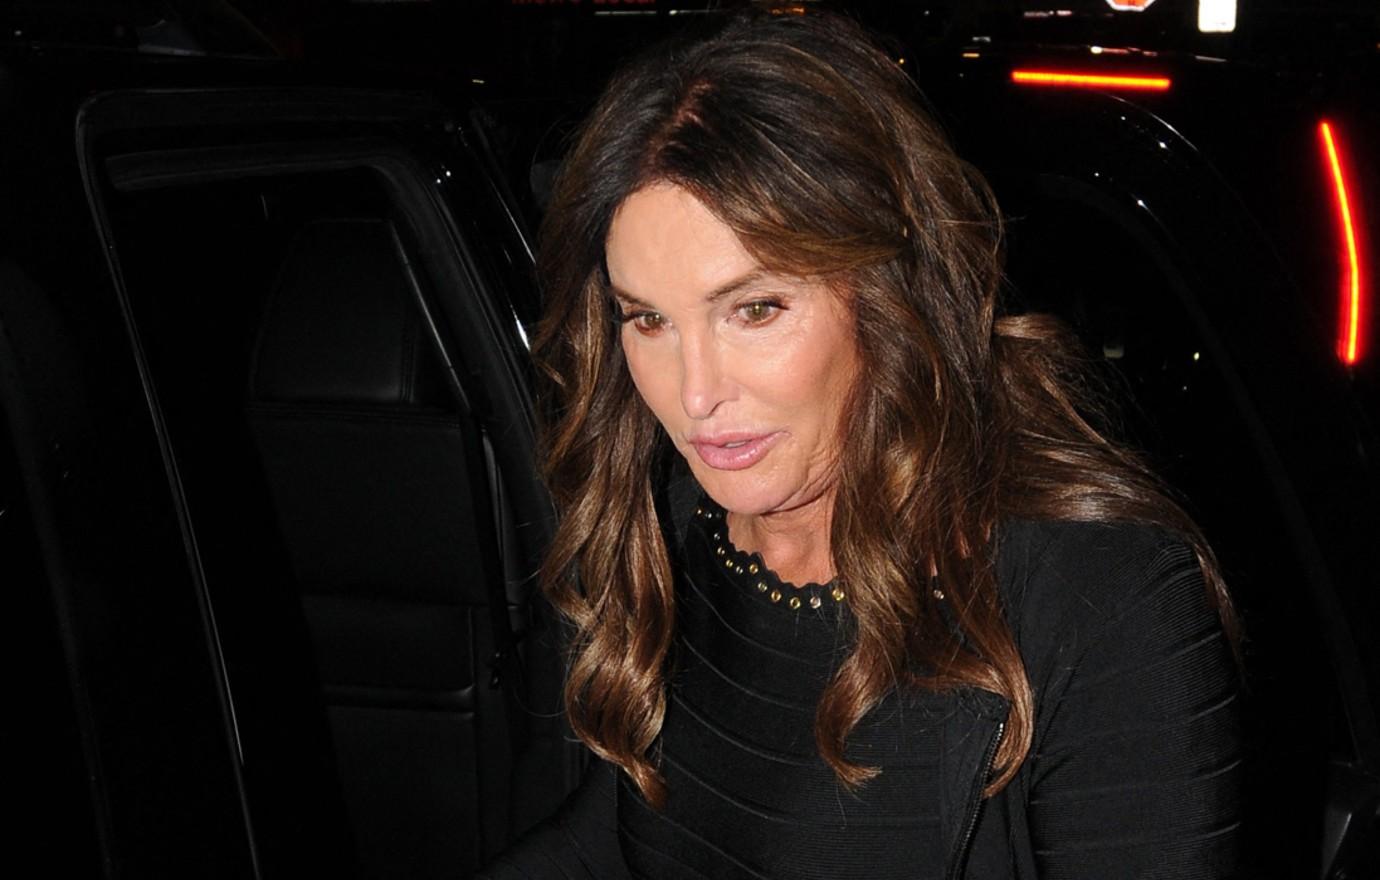 Busting Out! Caitlyn Jenner's Nipples Revealed Through Her Tight Shirt